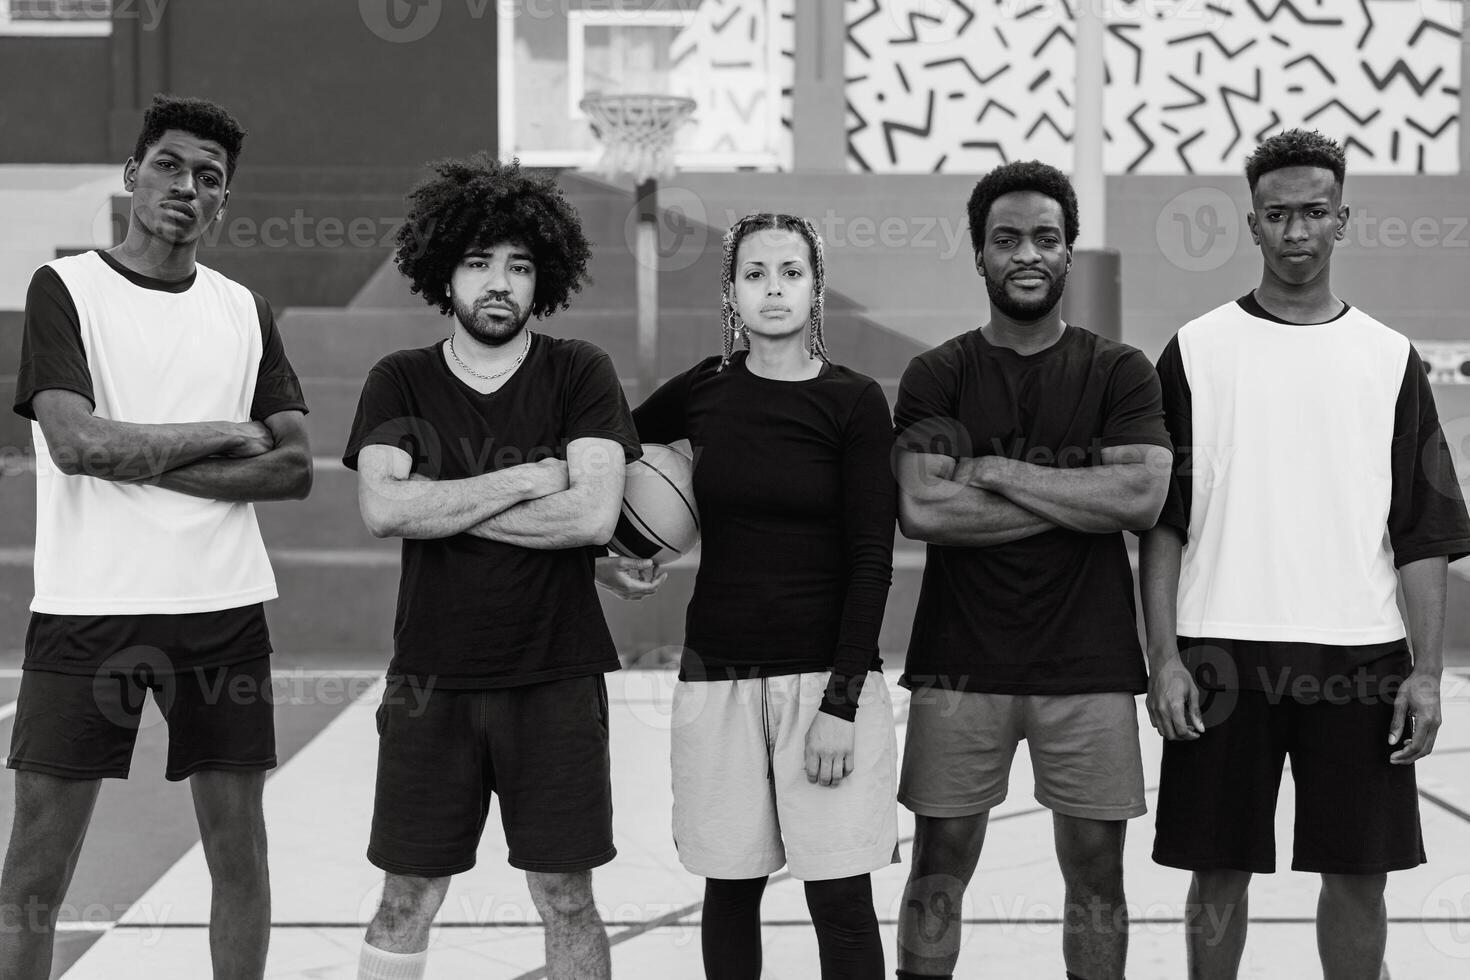 Group of multiracial people having fun playing basketball outdoor - Urban sport lifestyle concept - Black and white editing photo